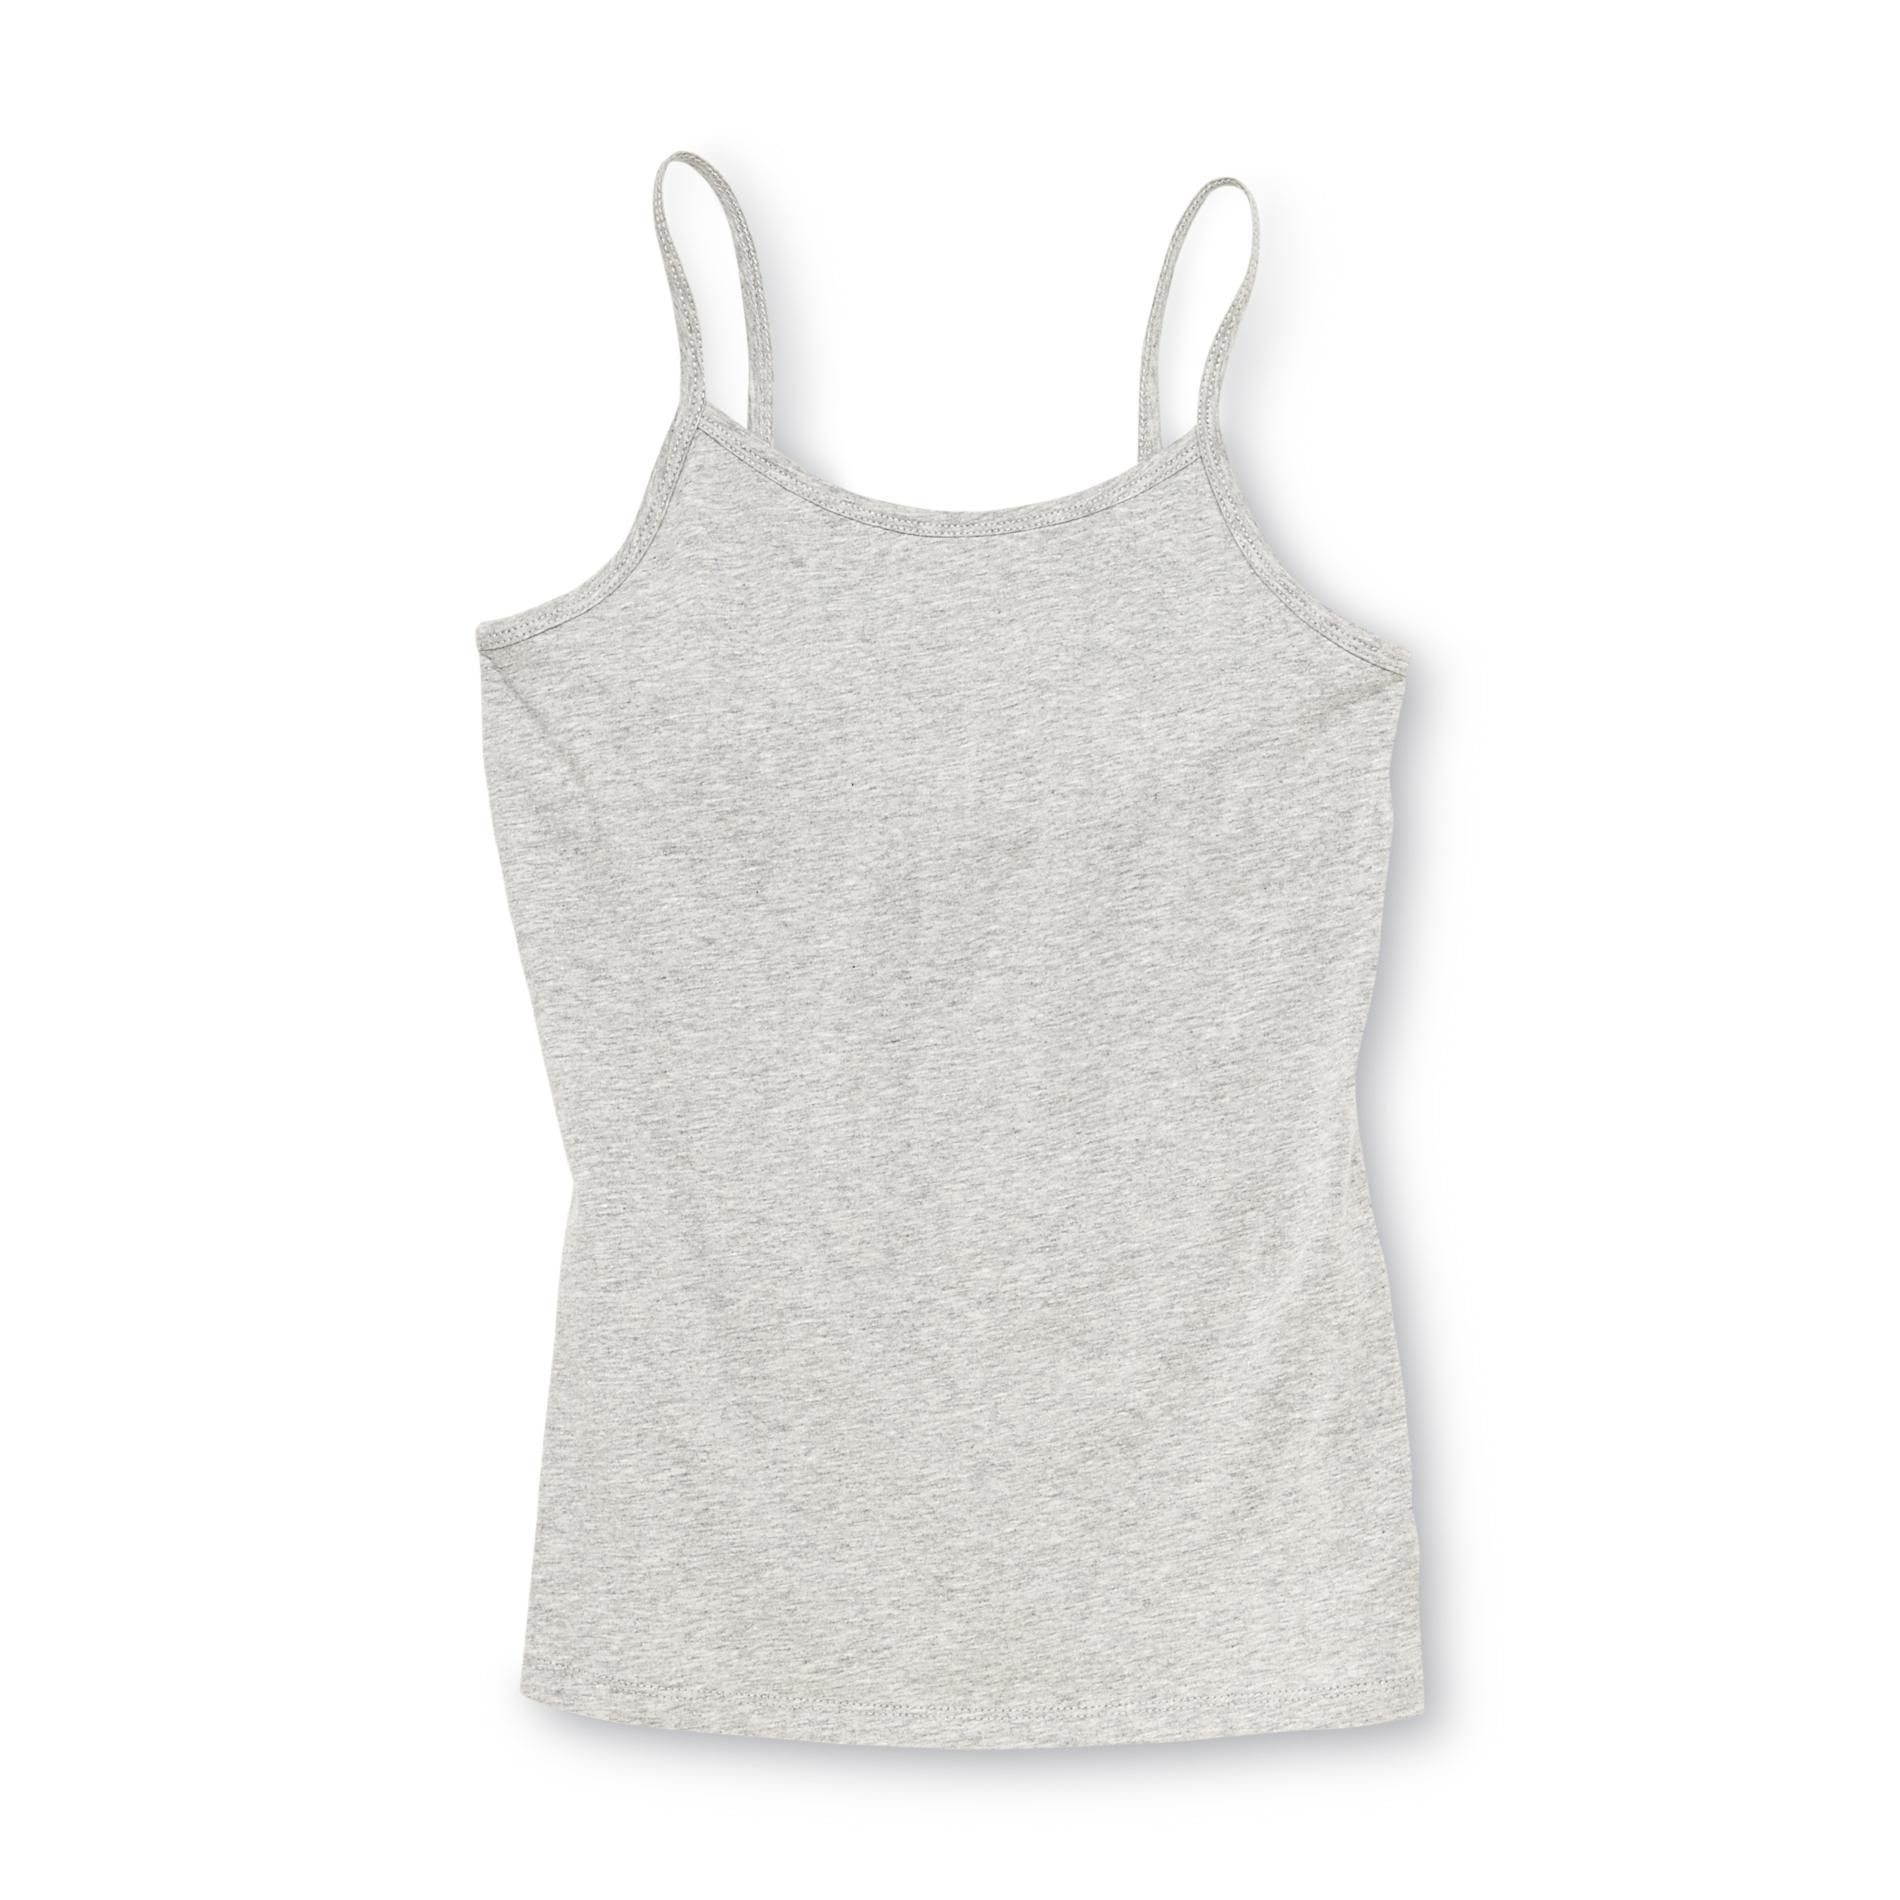 Canyon River Blues Girl's Scoop Neck Camisole